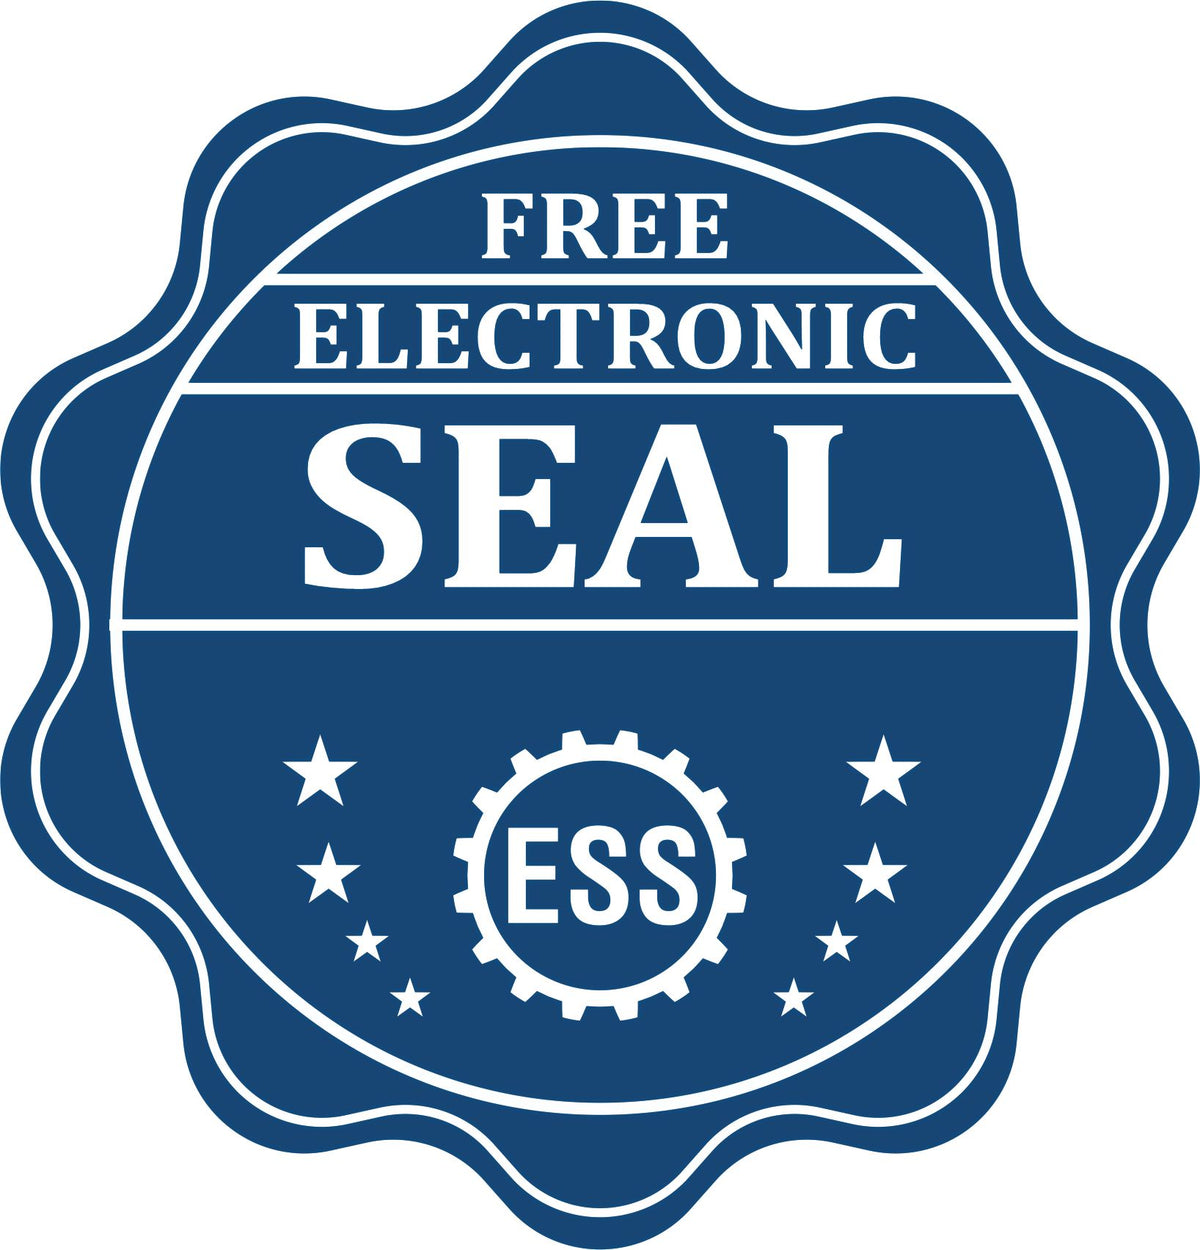 A badge showing a free electronic seal for the Heavy Duty Cast Iron District of Columbia Engineer Seal Embosser with stars and the ESS gear on the emblem.